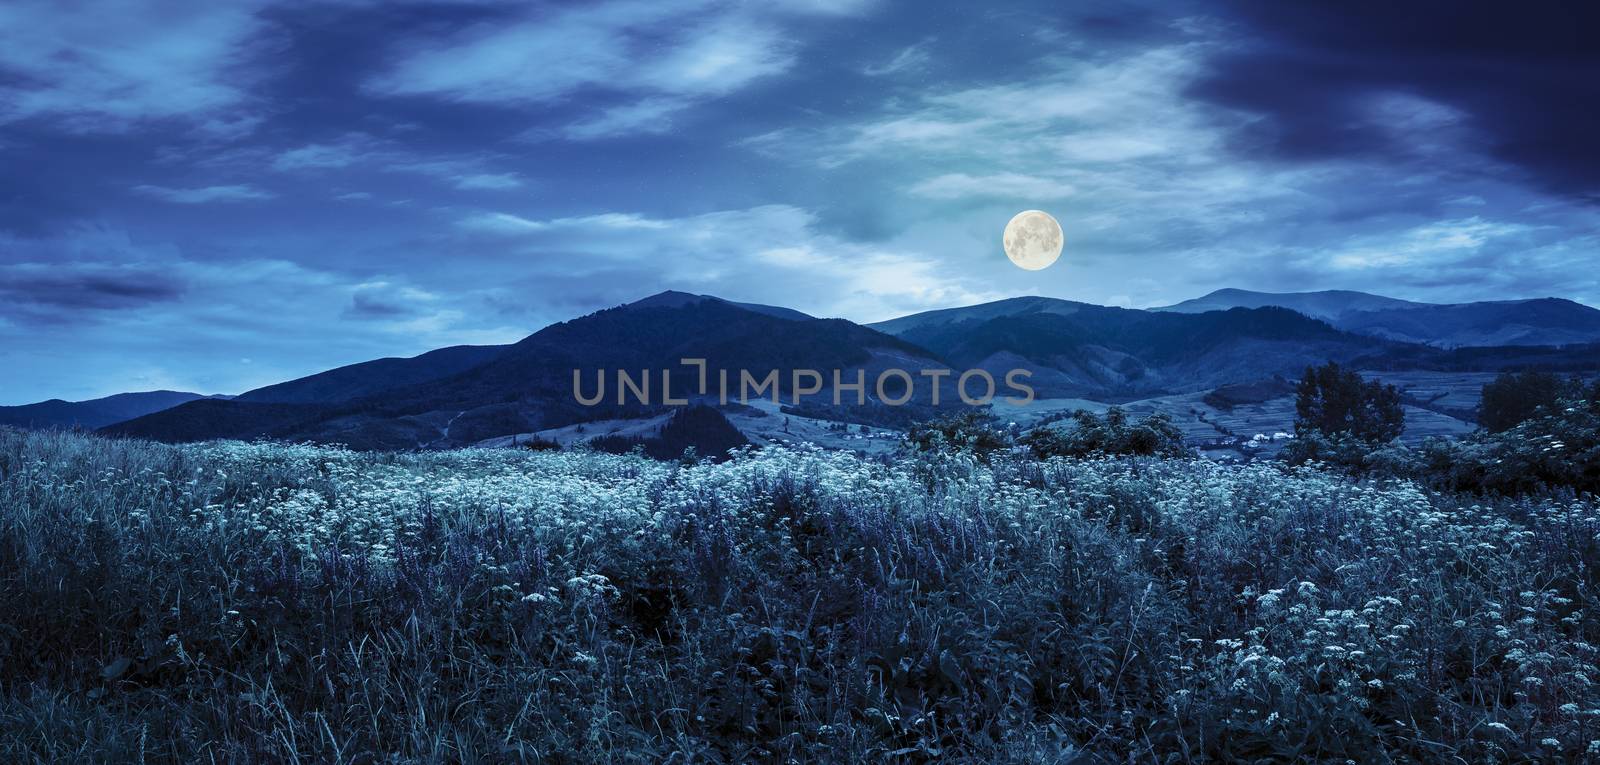 meadow with flowers in mountains at night by Pellinni